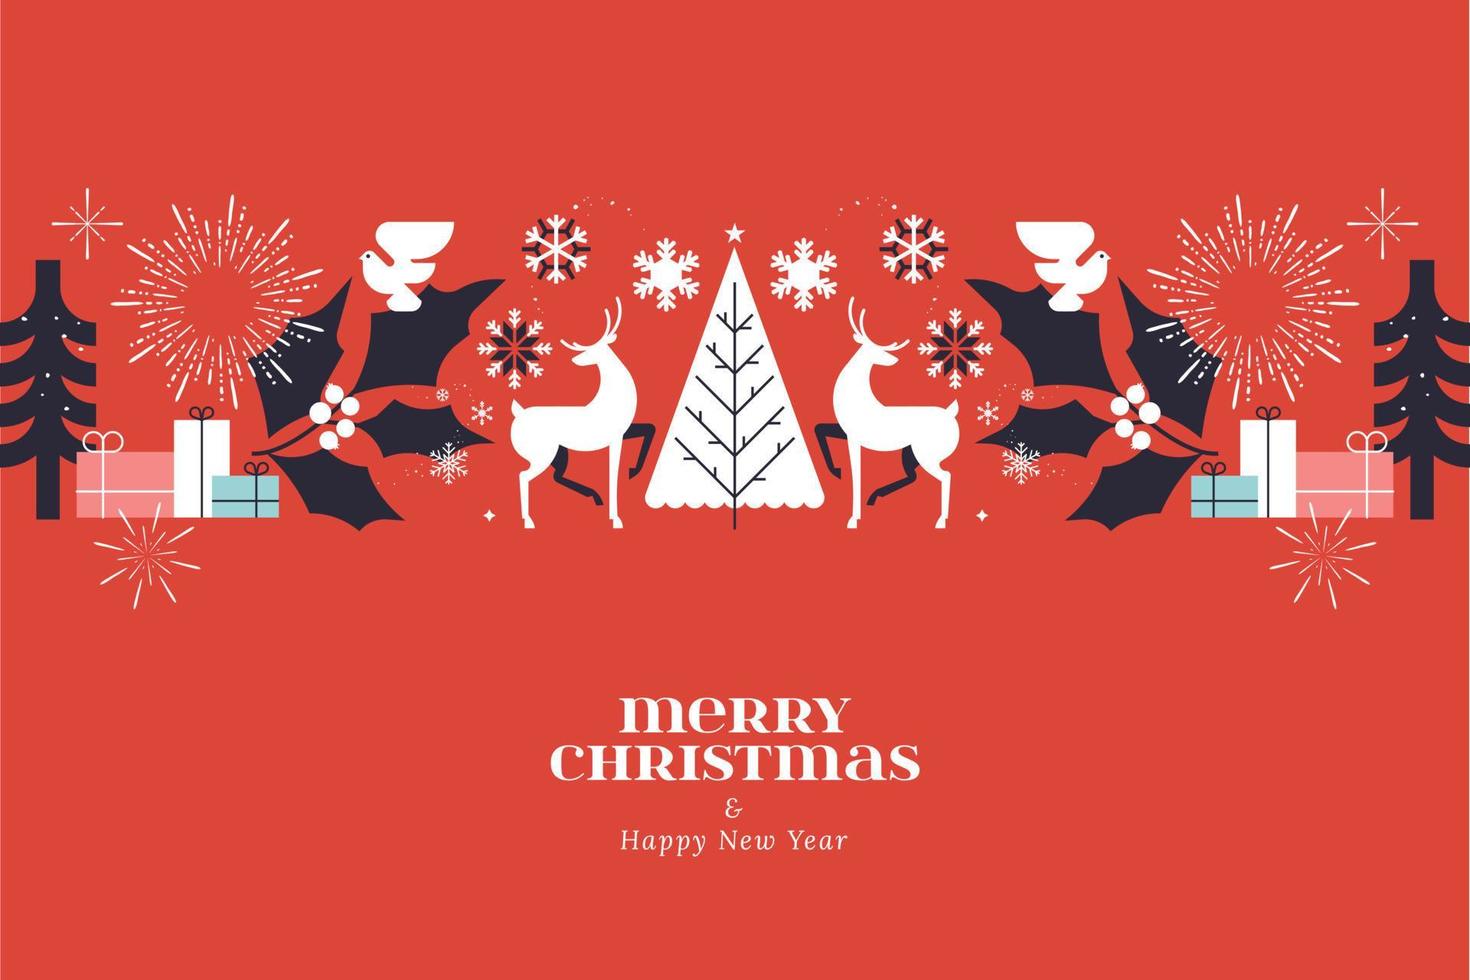 Merry Christmas and Happy New Year. Vector illustration for background, greeting card, party invitation card, website banner, social media banner, marketing material.